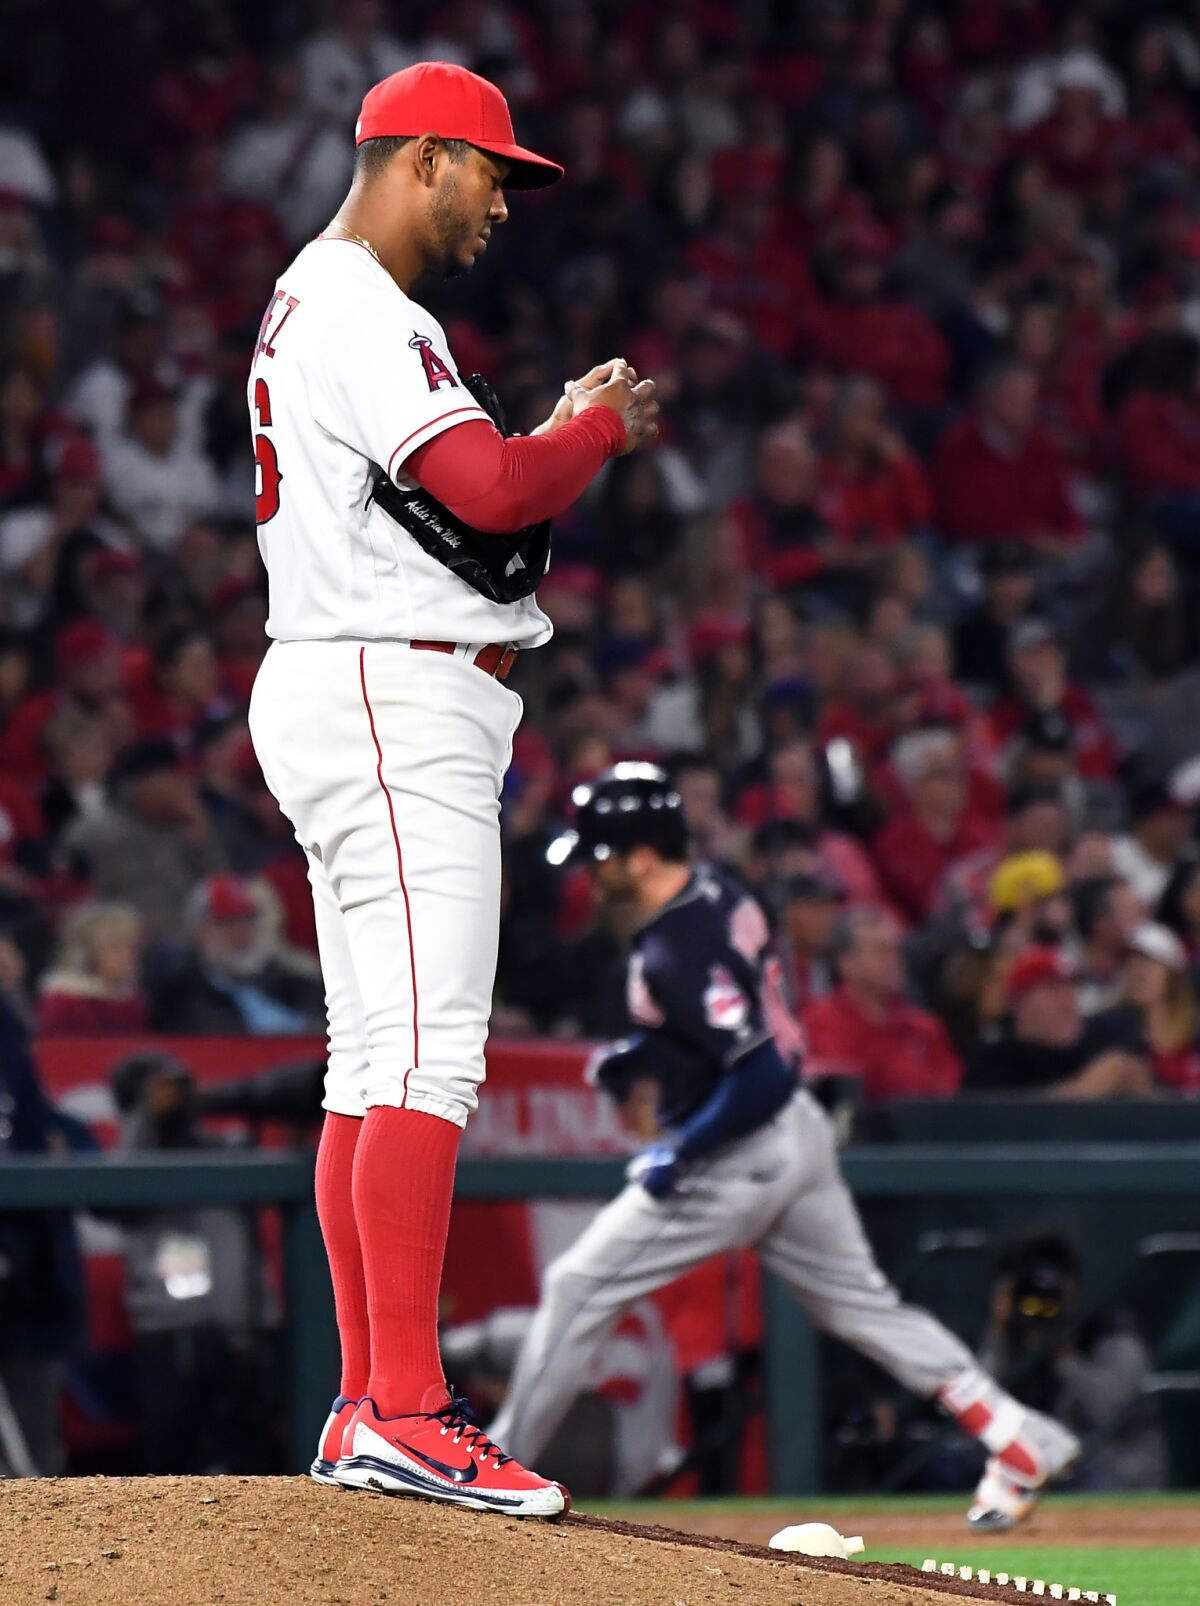 Angels pitcher J.C. Ramirez stands on the mound as Indians batter Tyler Naquin rounds the bases on a two-run home run in the 4th inning.